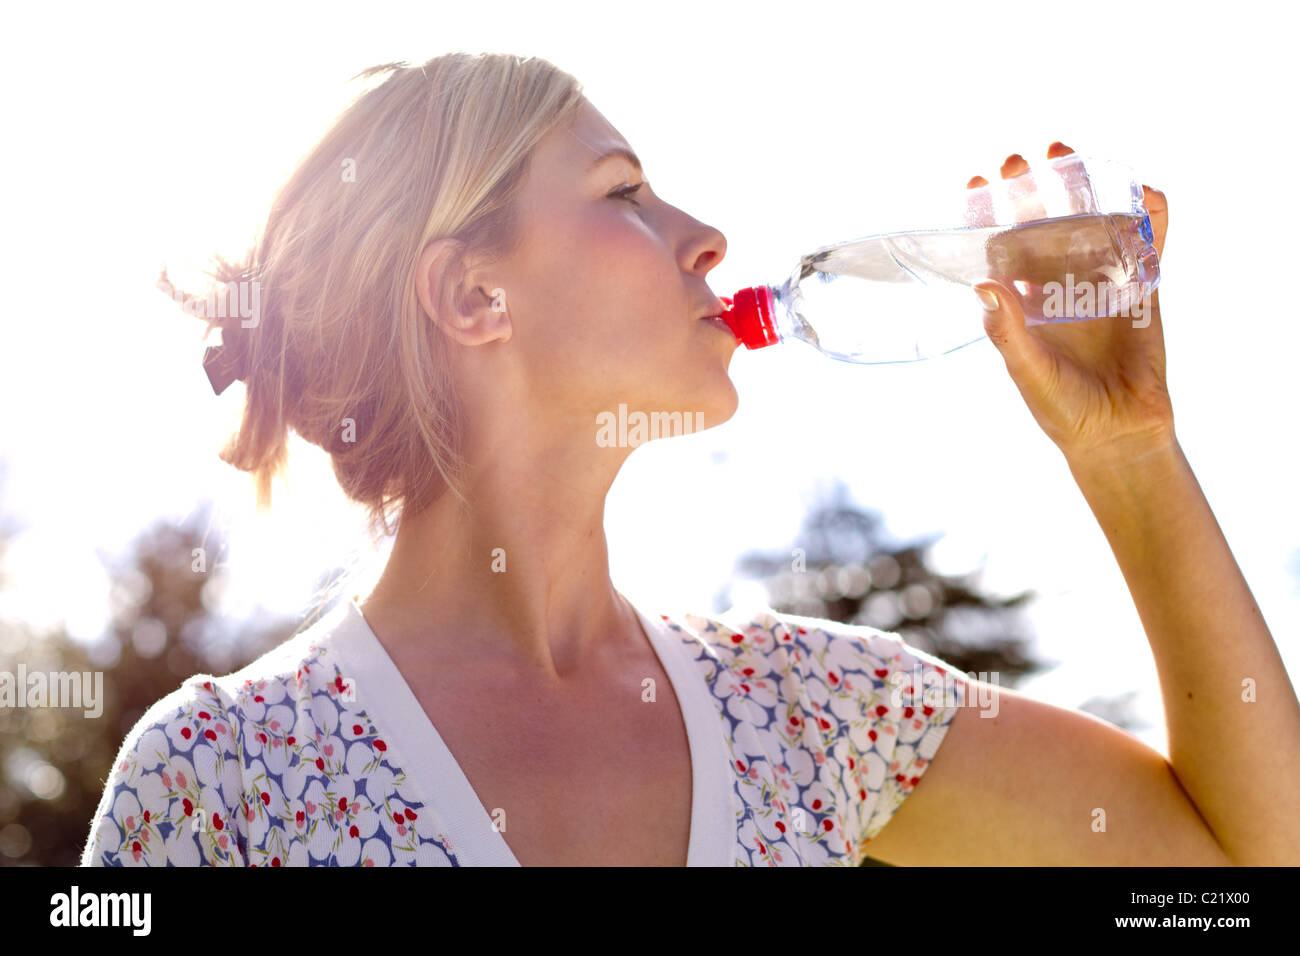 Woman drinking bottled water Stock Photo